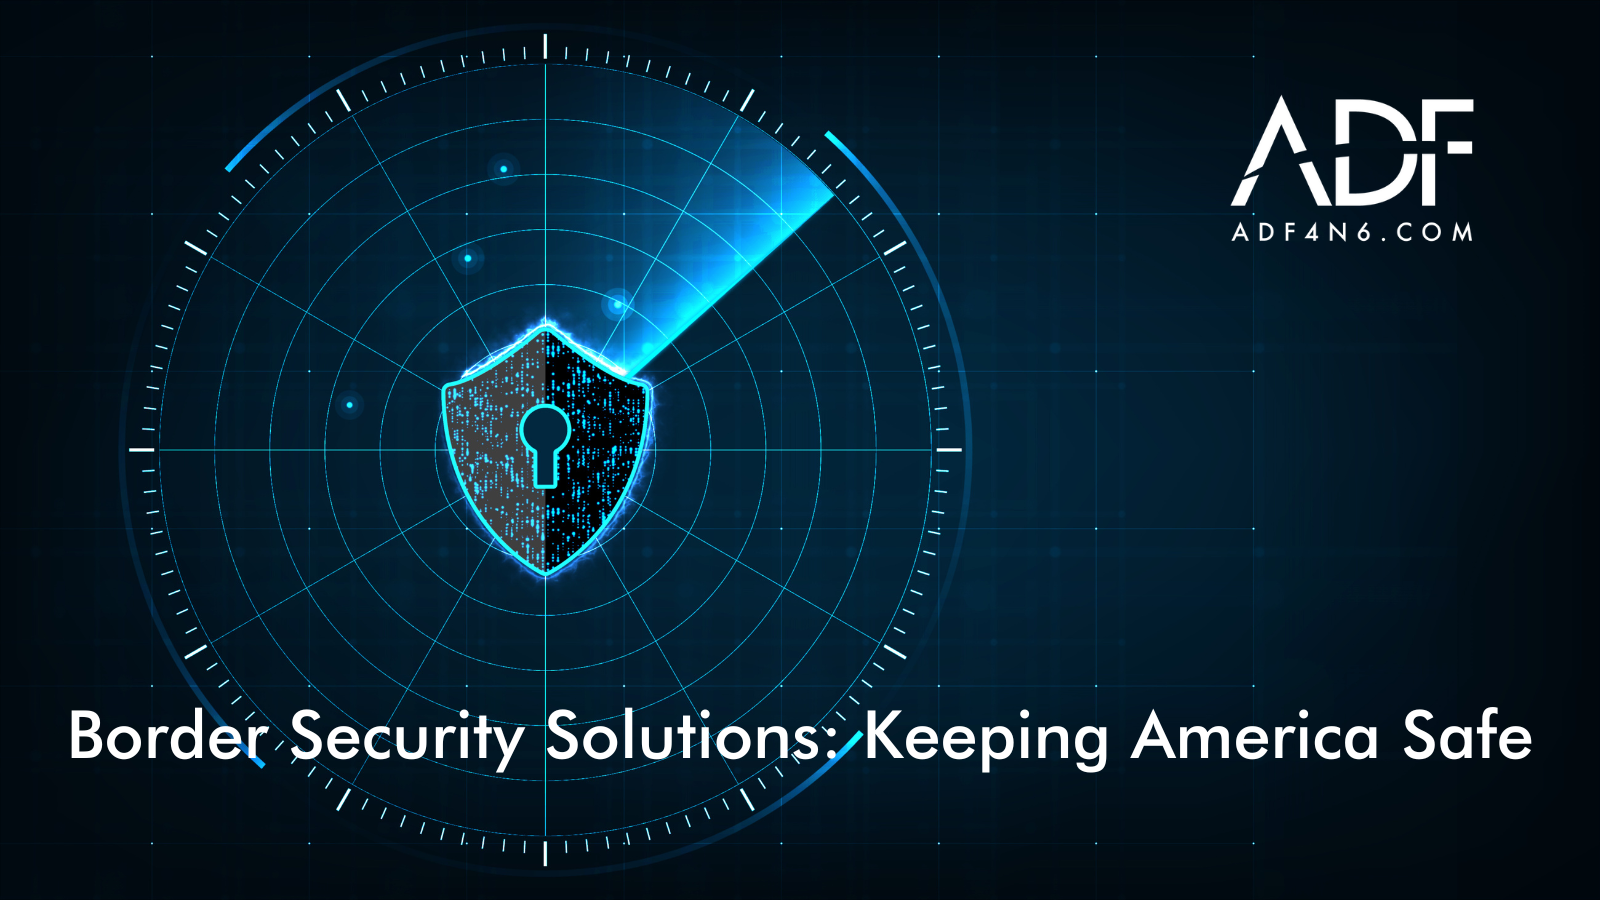 Border Security Solutions: Keeping America Safe